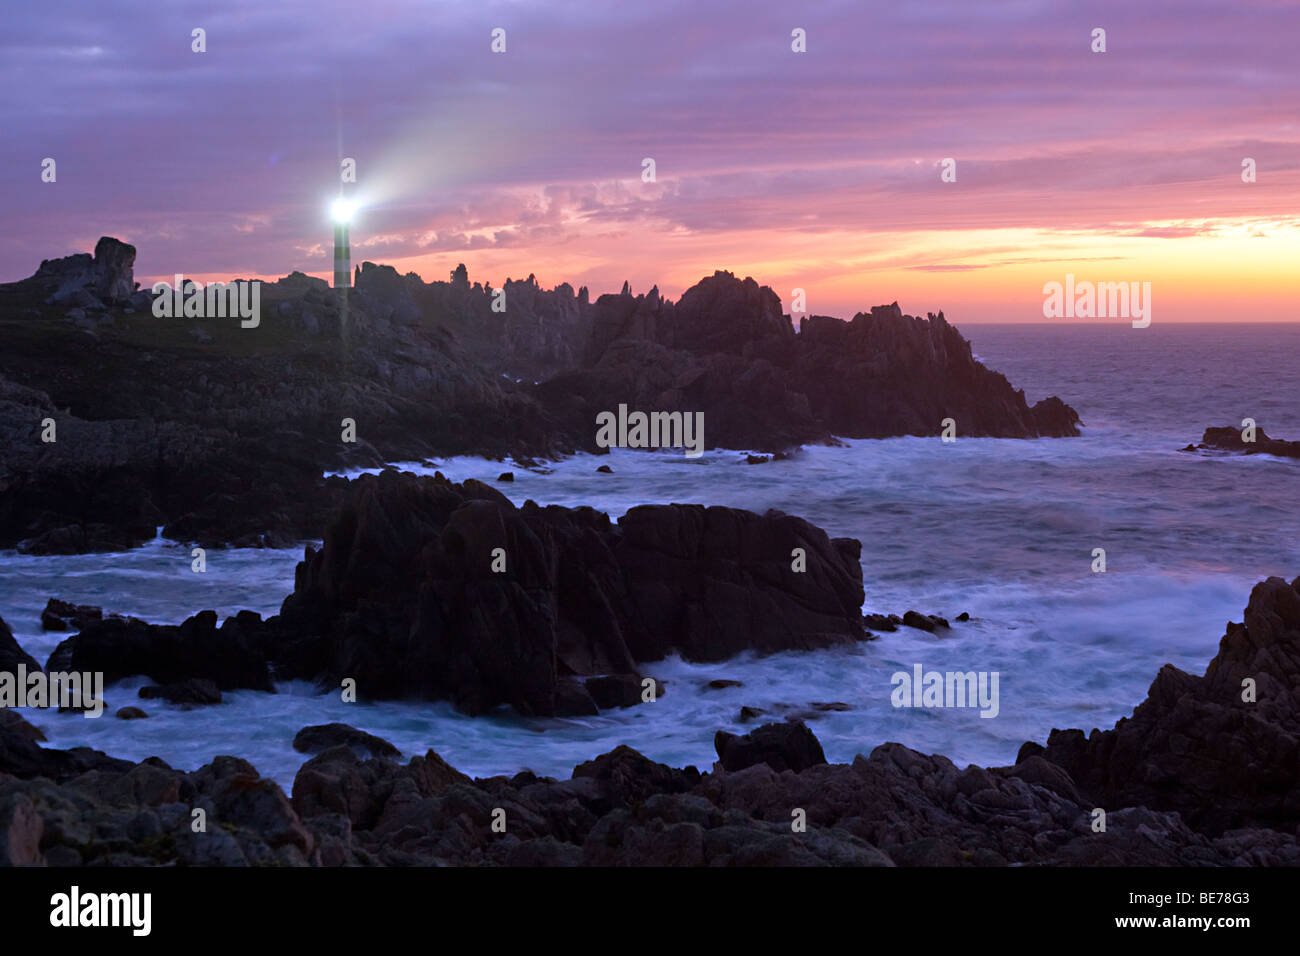 ouessant island rocky coastline at dusk with creac'h lighthouse lighted, brittany, finistere, france Stock Photo